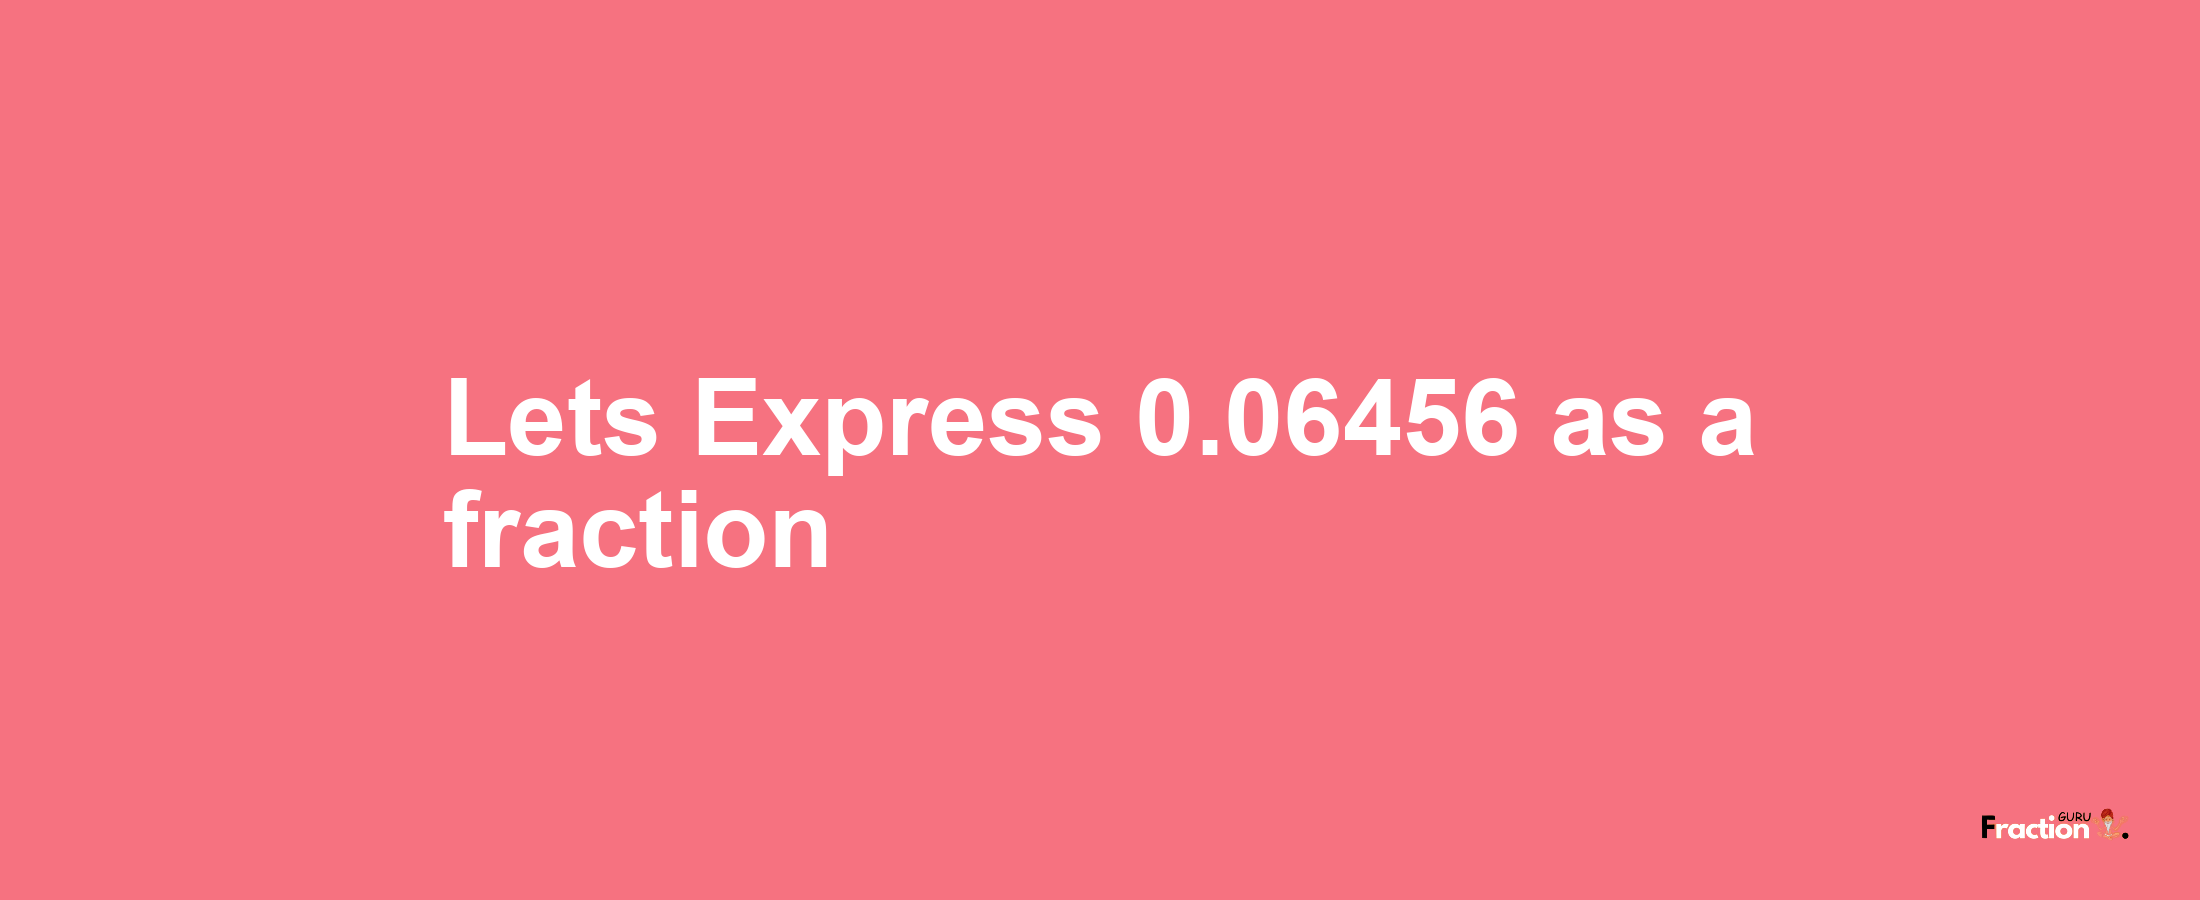 Lets Express 0.06456 as afraction